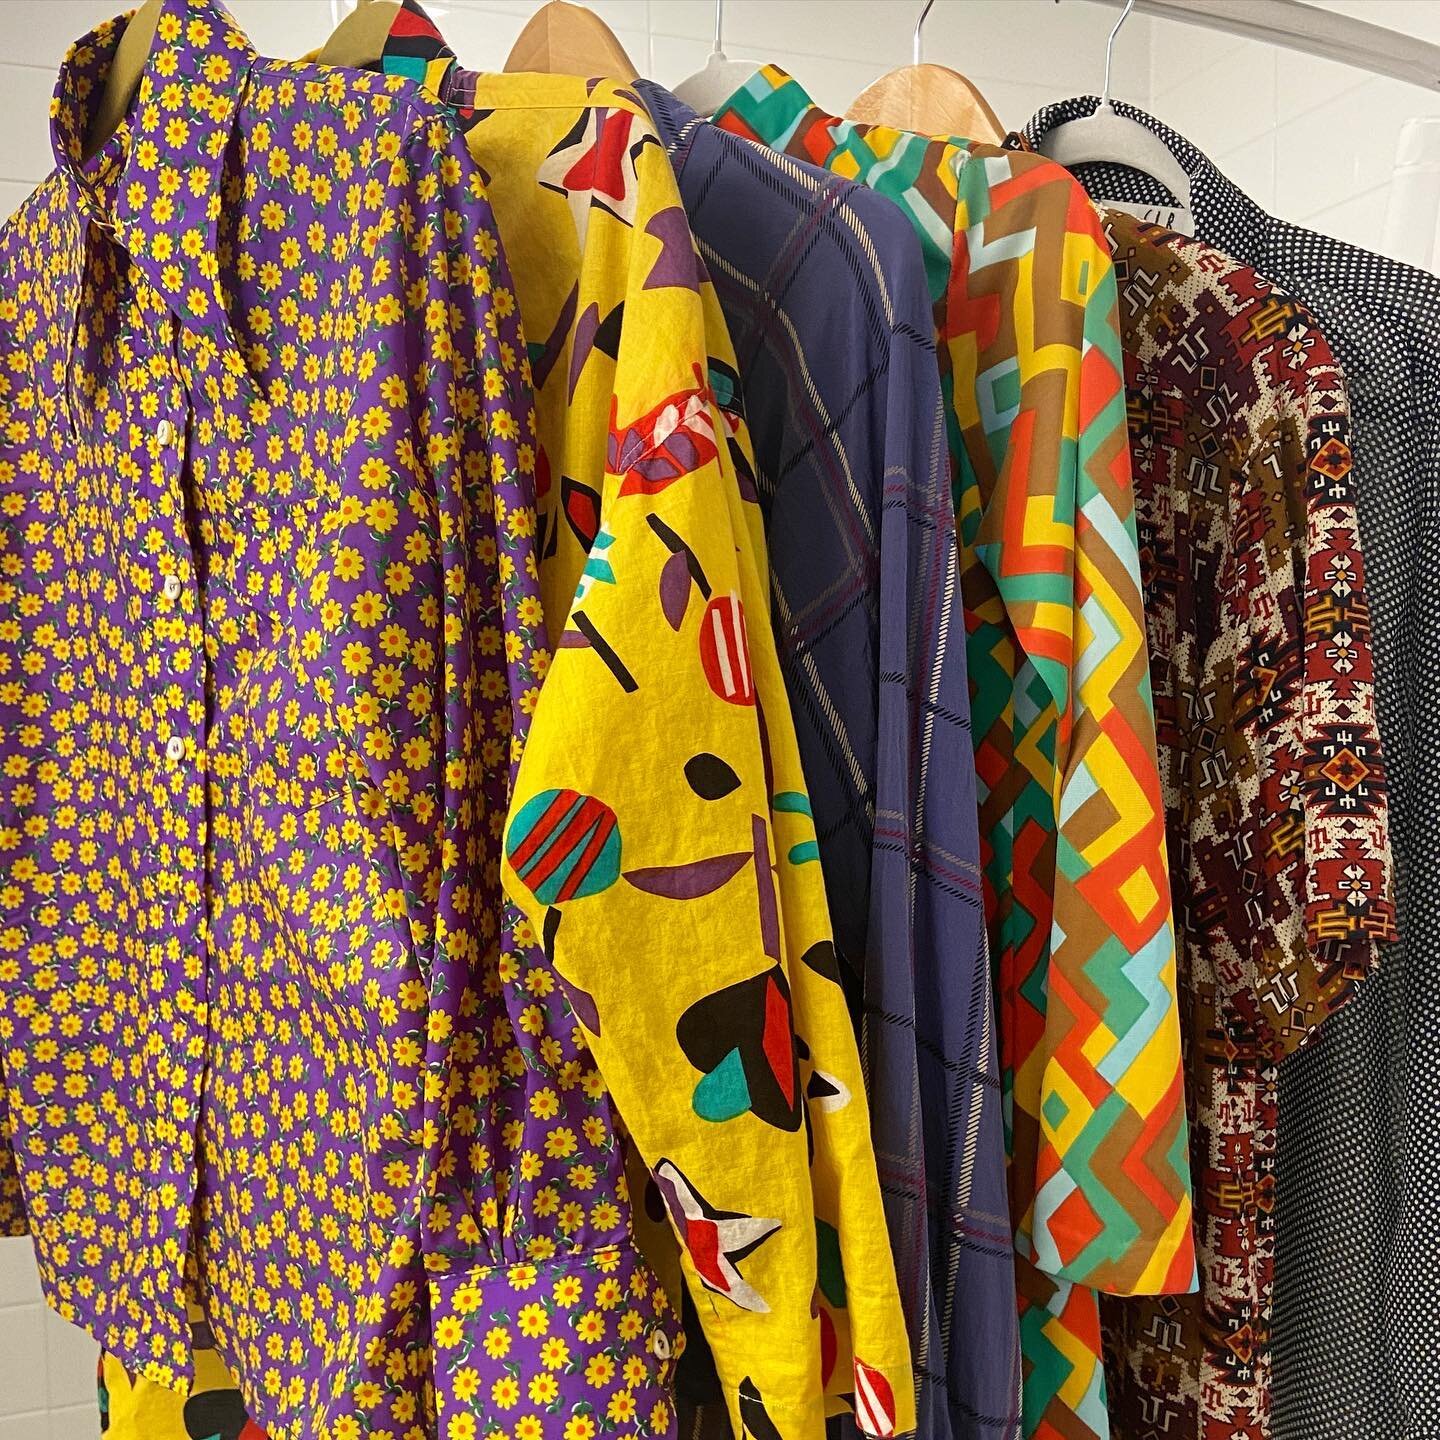 Laundry Day!  Lots of fun new arrivals! 
Open til 5:00! 
#vintageprints #sustainablefashion